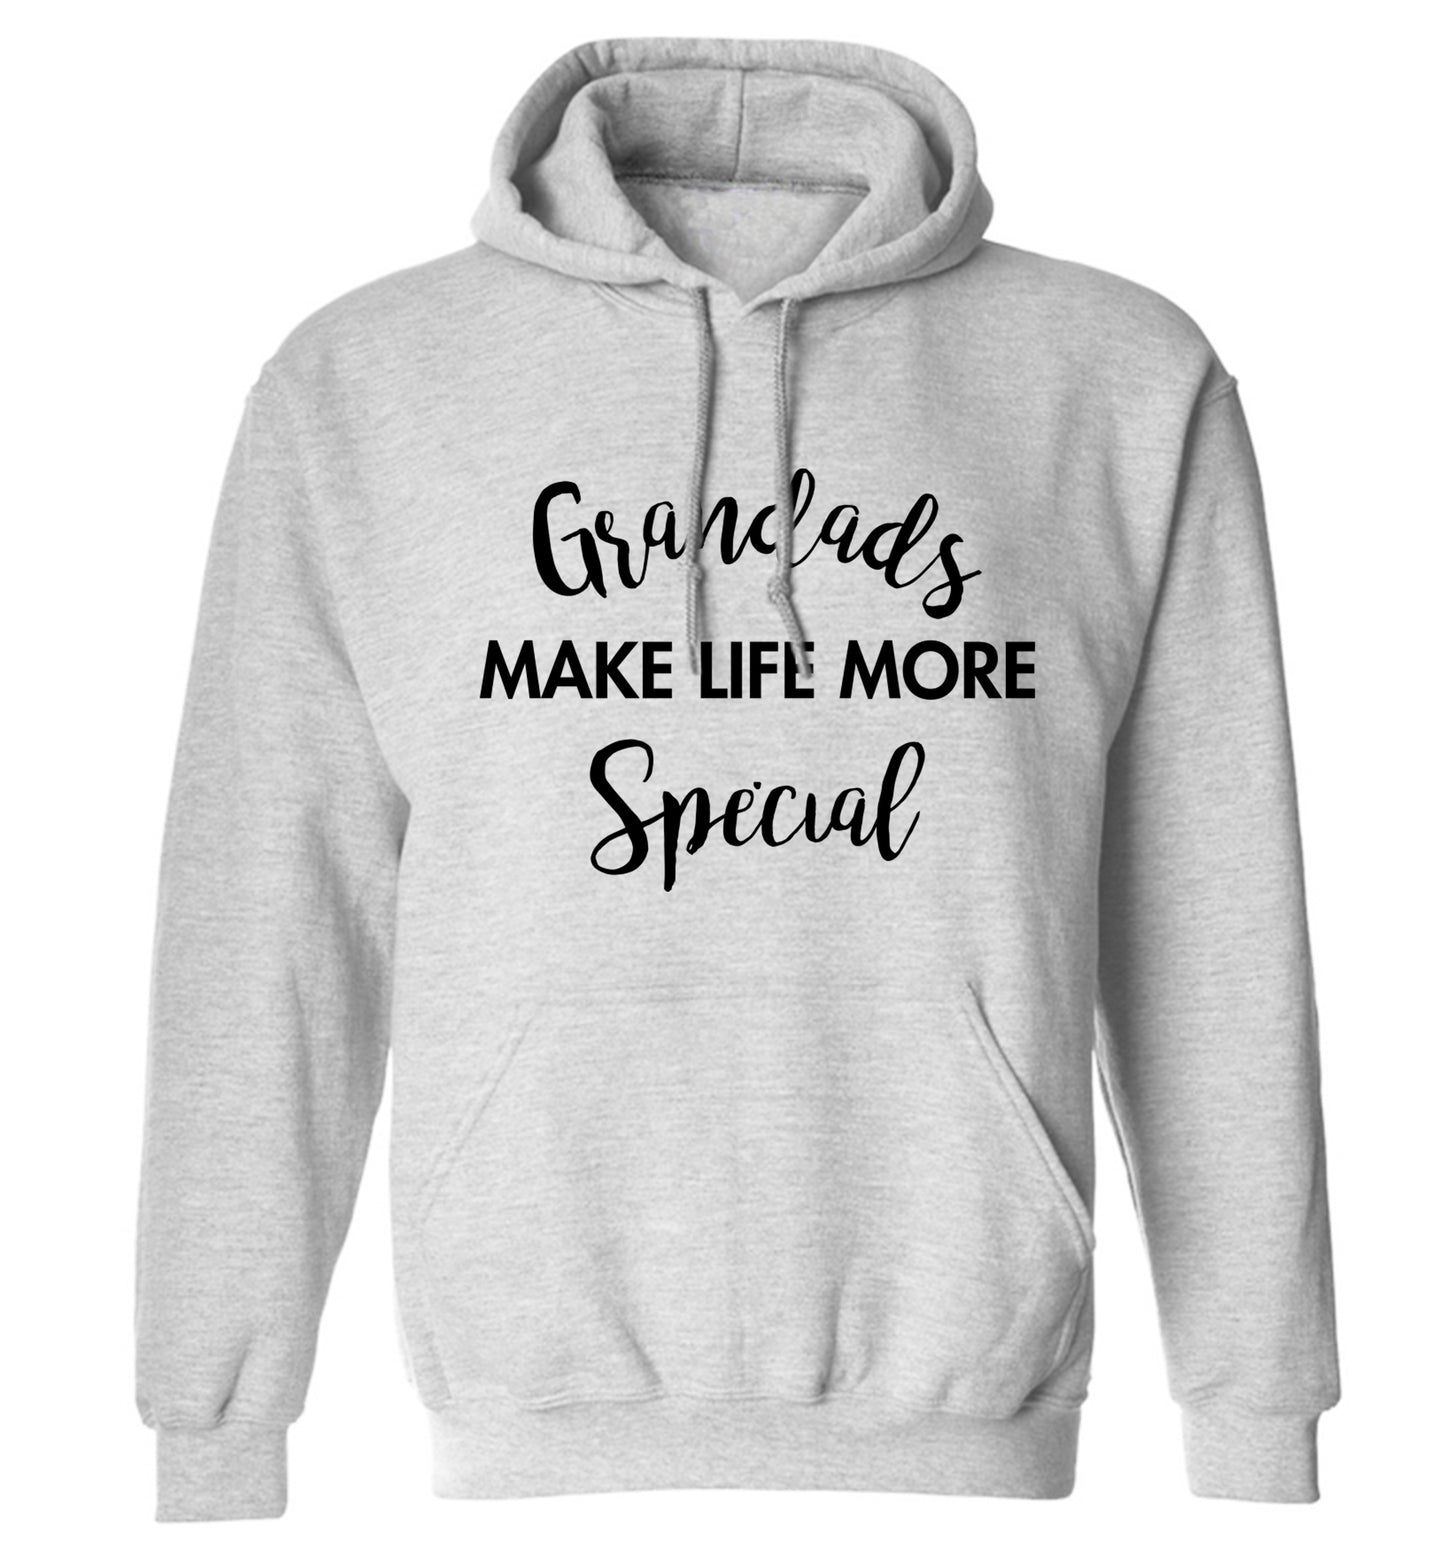 Grandads make life more special adults unisex grey hoodie 2XL